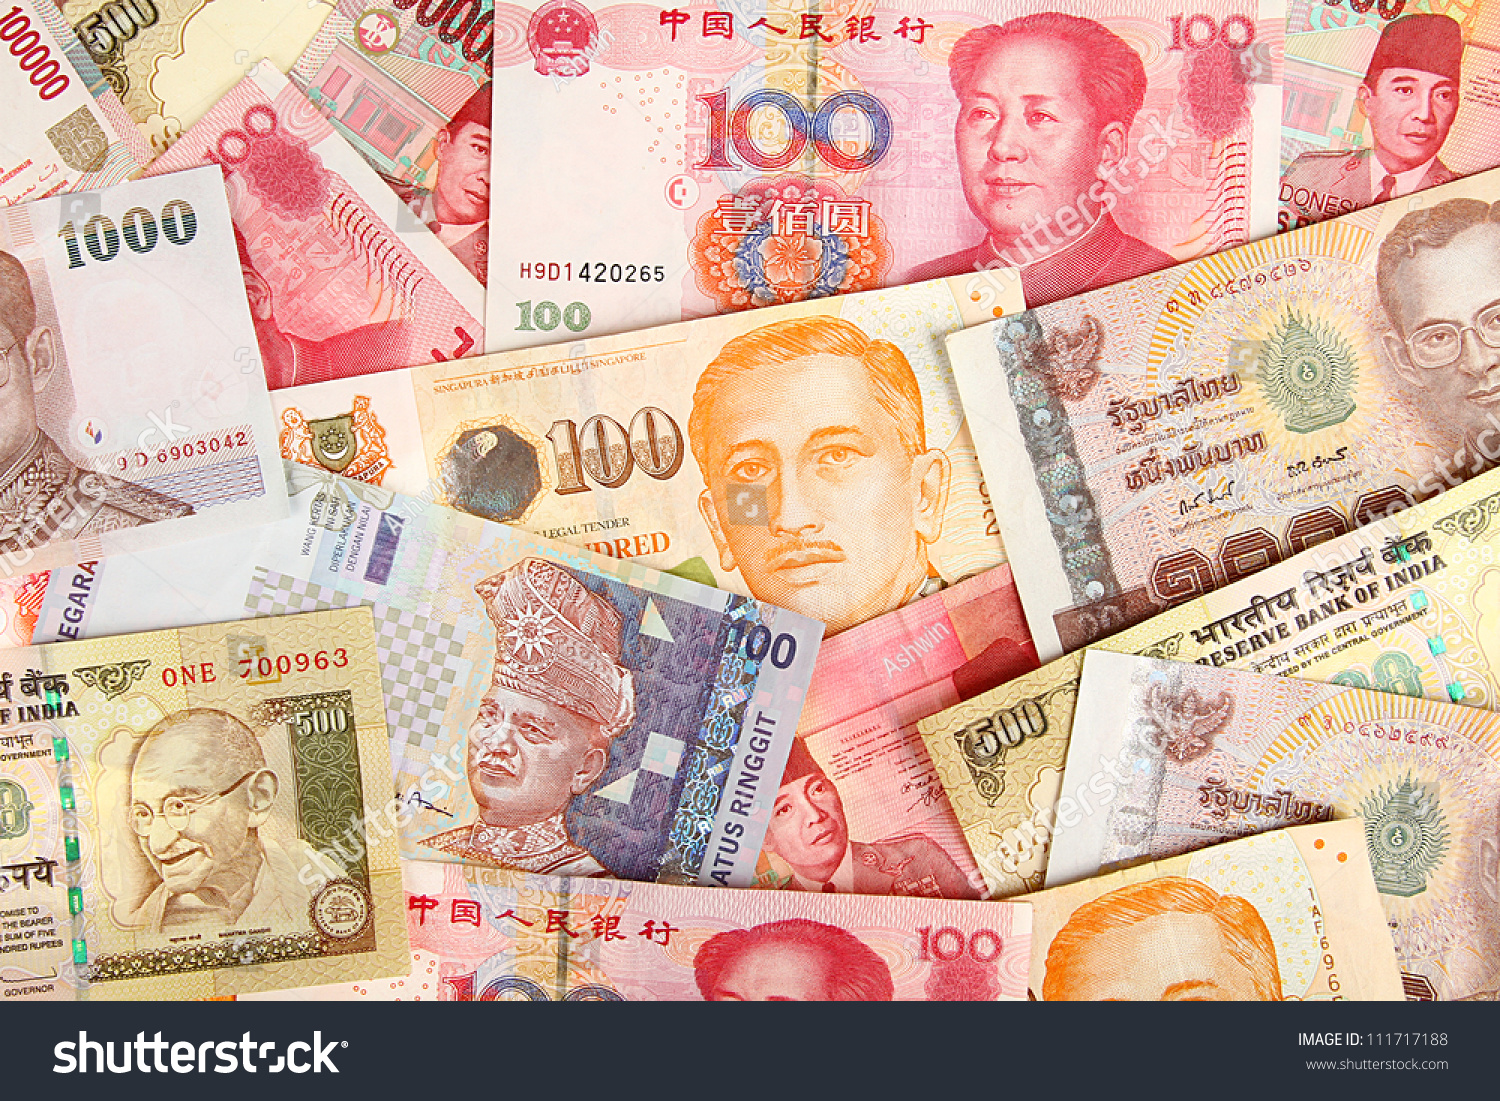 Background of asian currency.